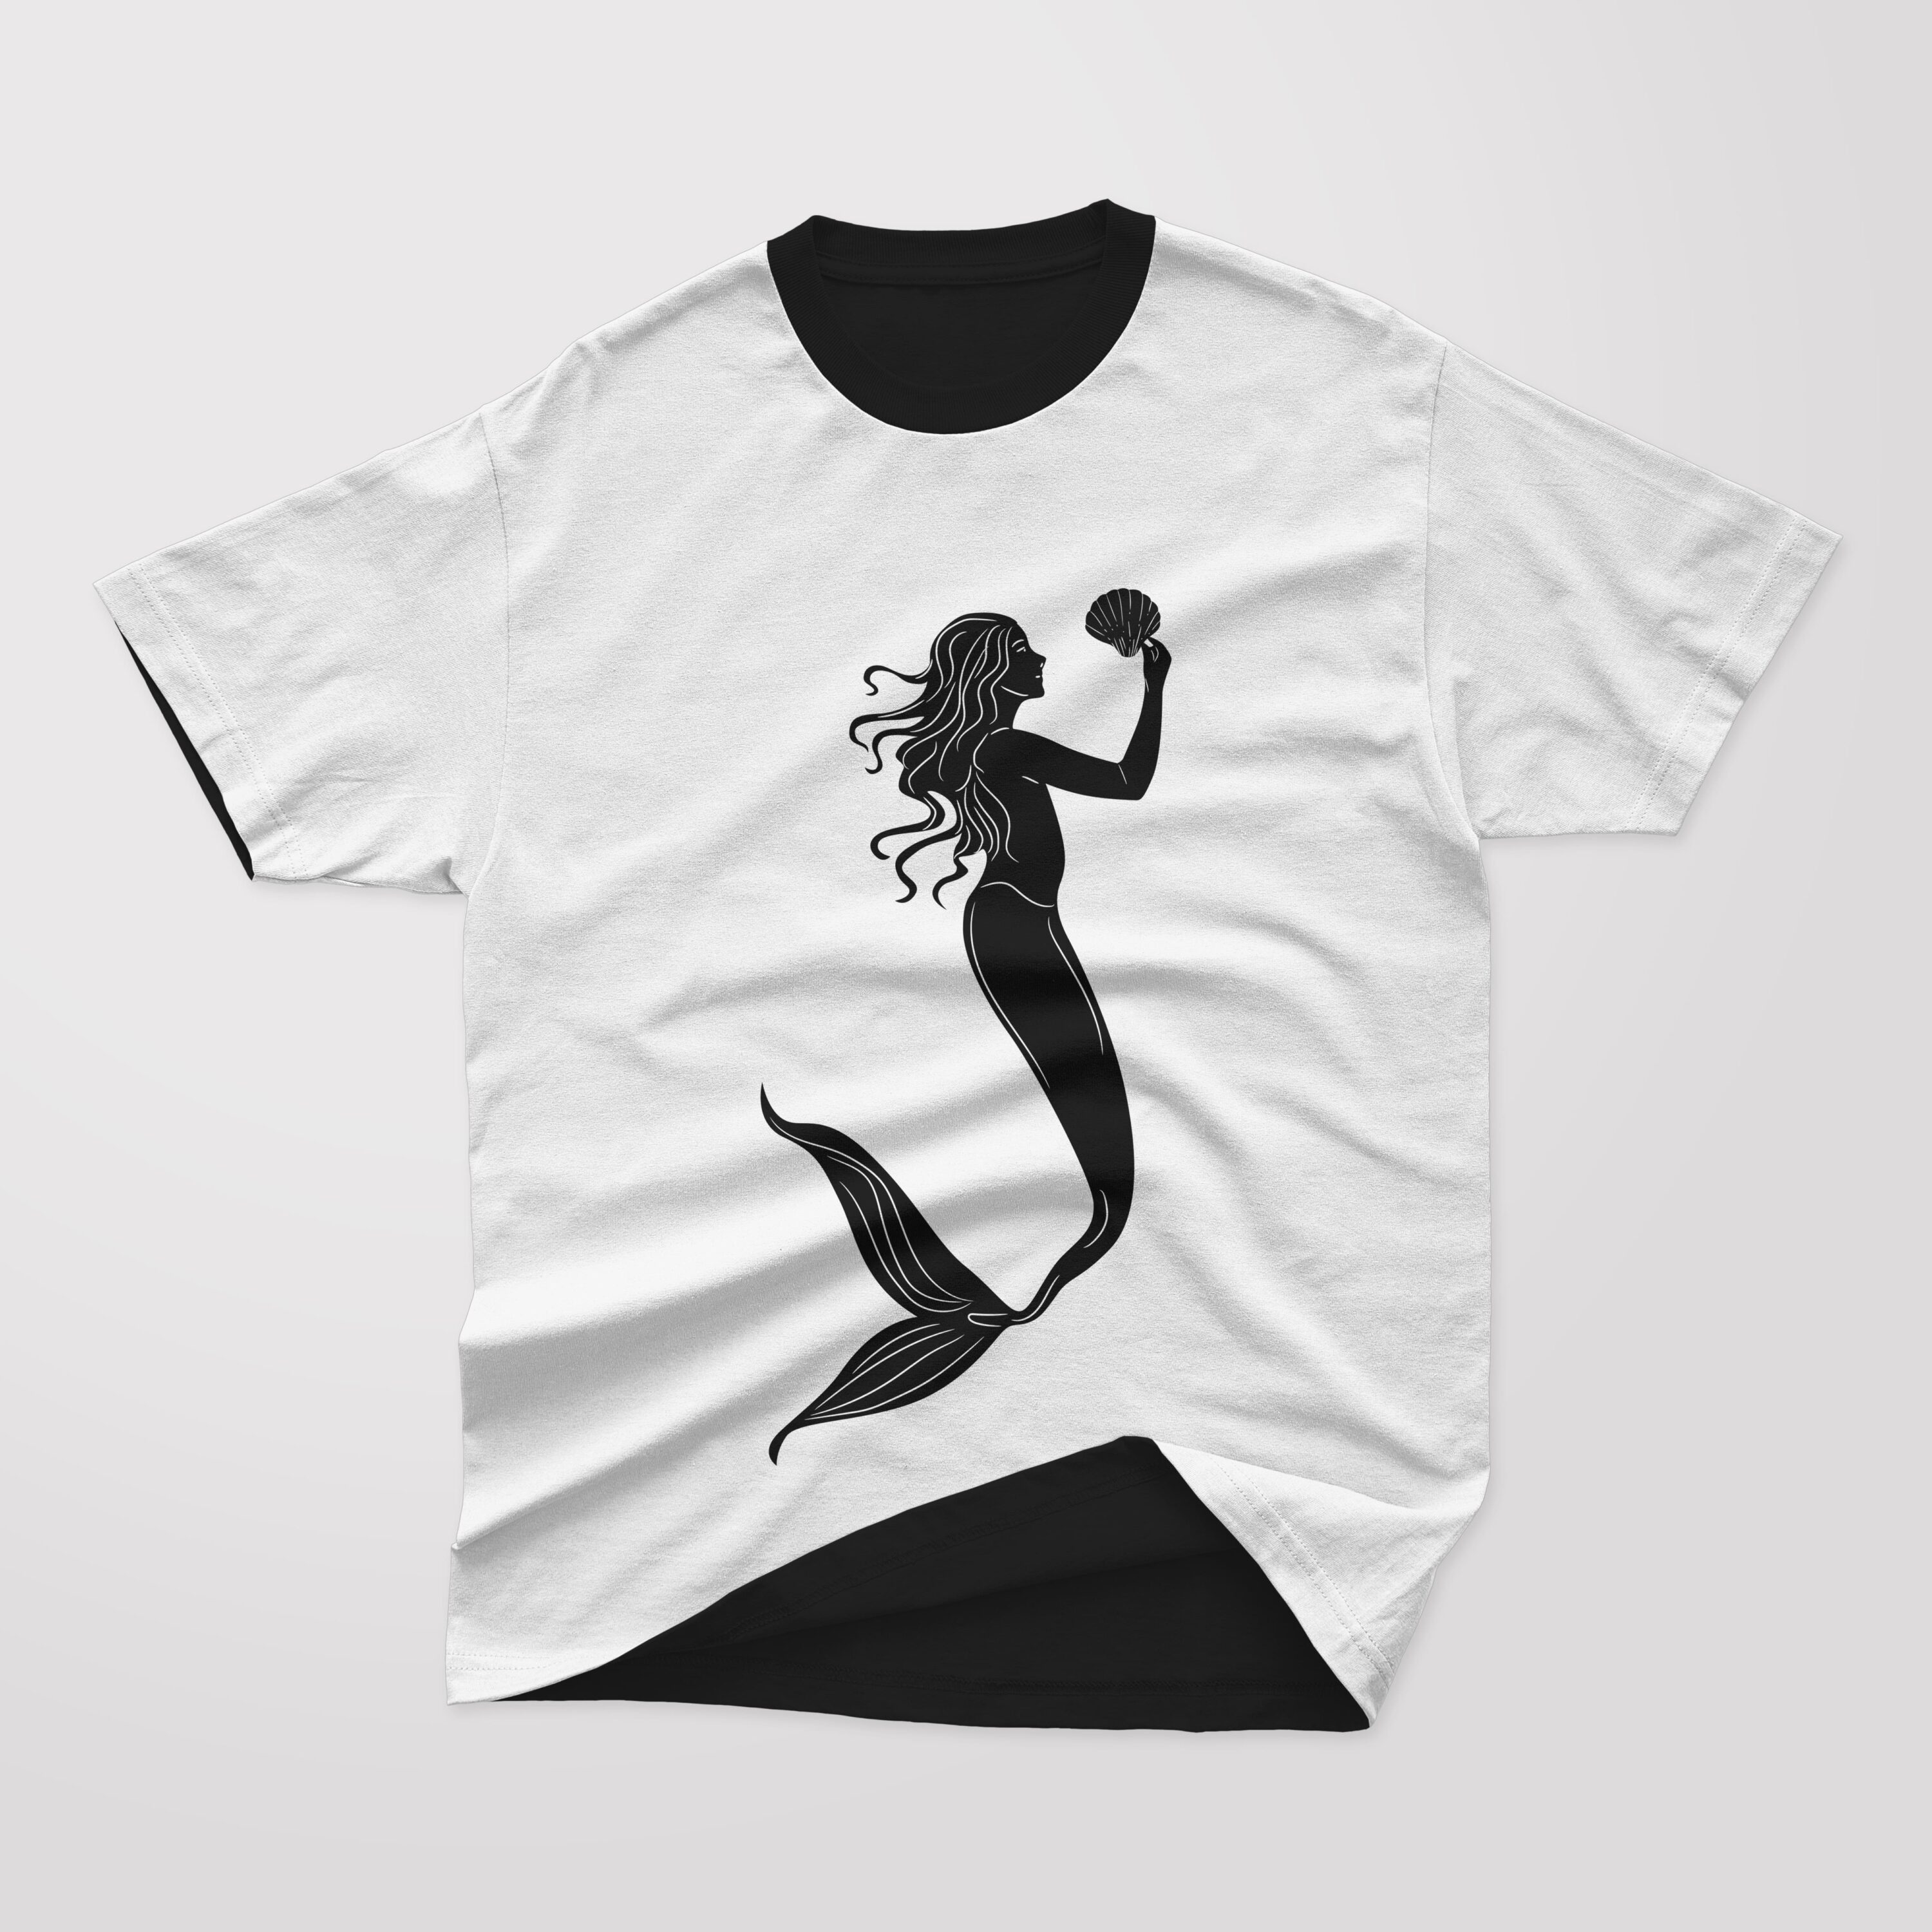 BW t-shirt with the silhouette mermaid.